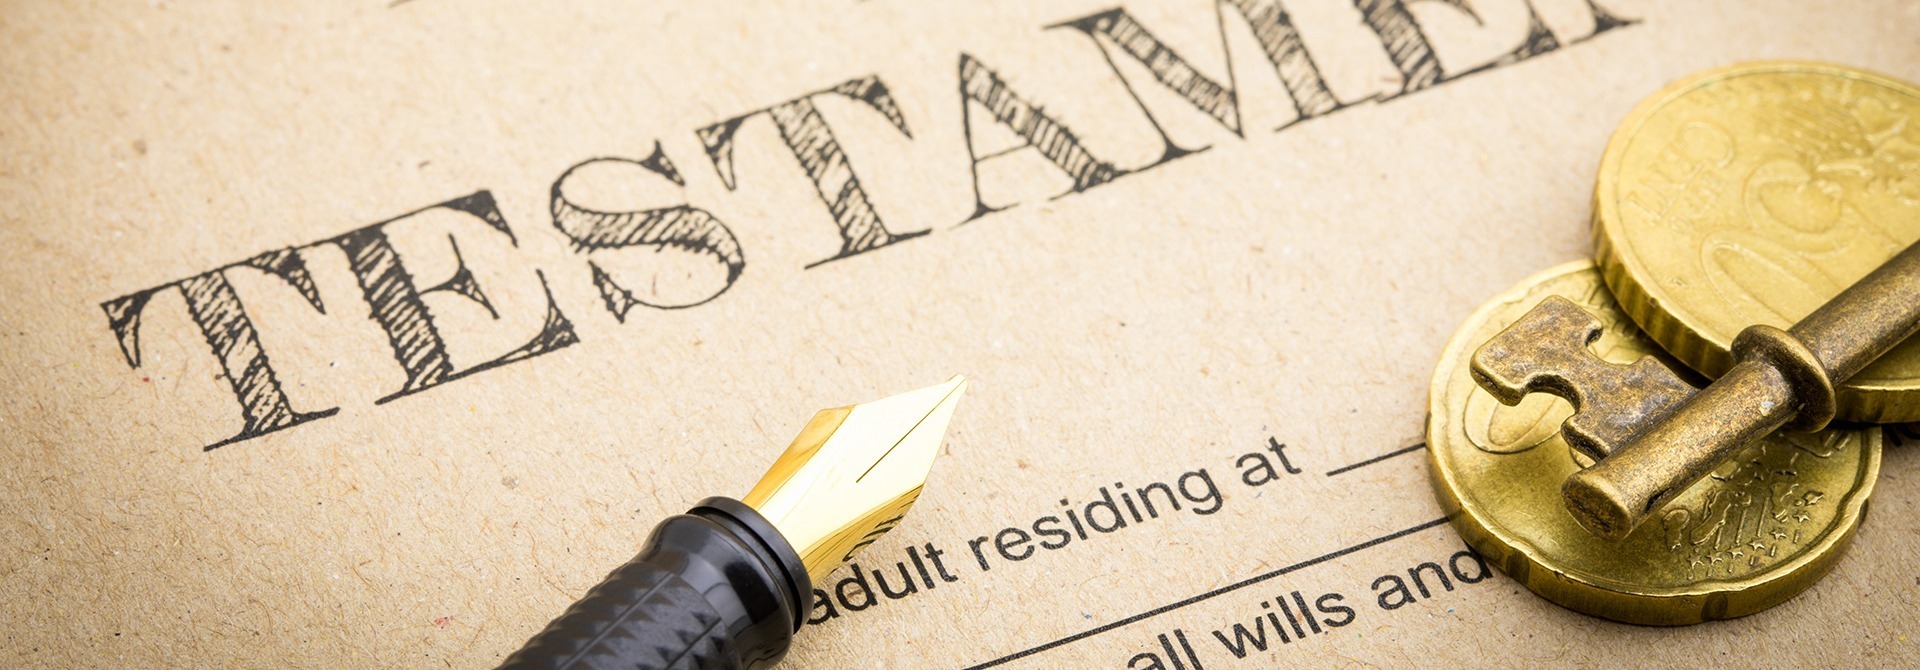 Simplify estate planning with a will in the UAE.